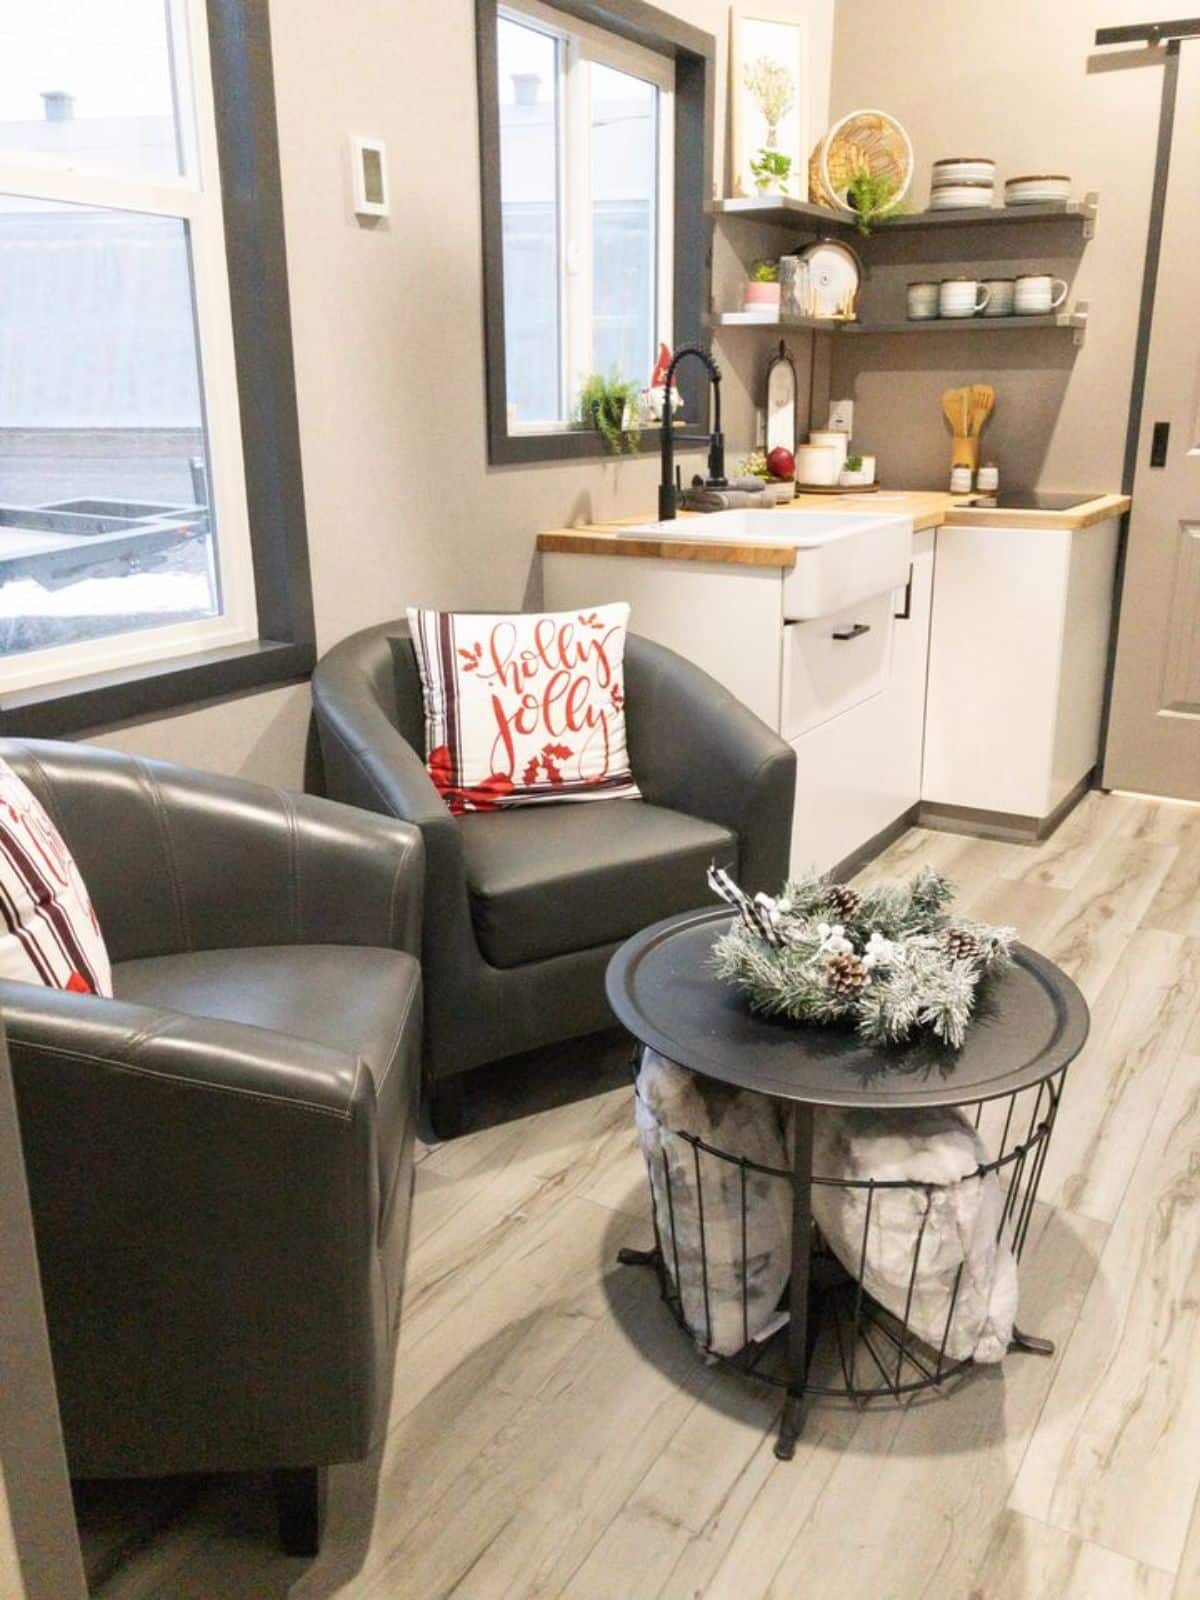 2 sofa chairs and center table in living area of Luxurious & Stunning Tiny Home